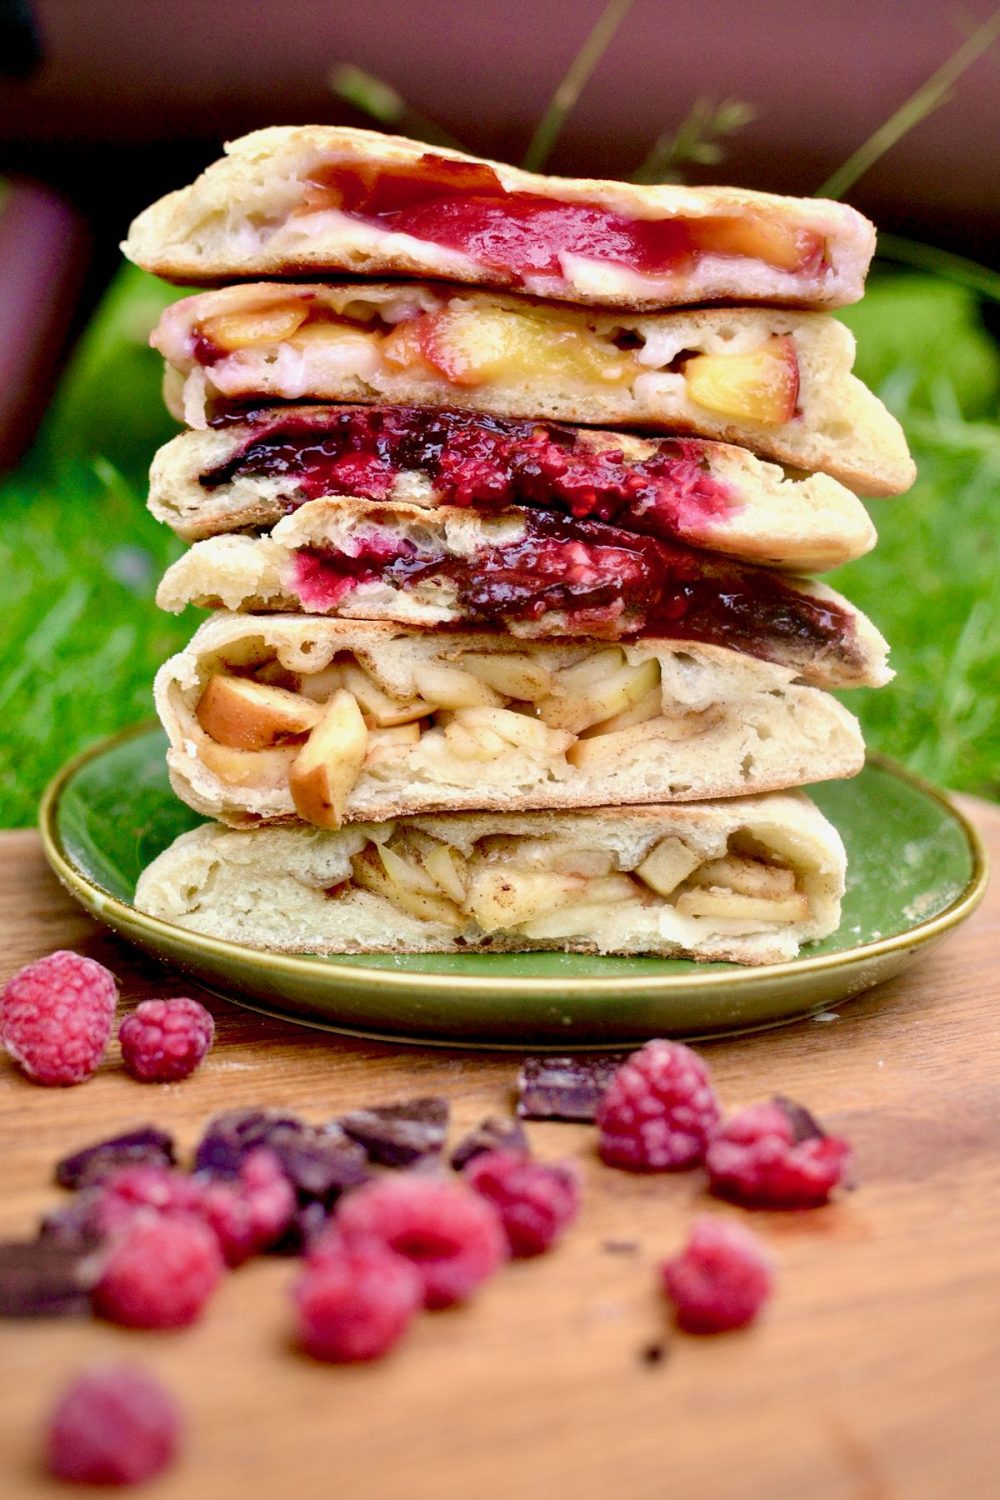 Different filled sweet pizzas cut in half and stacked on top of each other: There are fillings of peach and coconut cream, raspberry and chocolate, and apple and cinnamon.